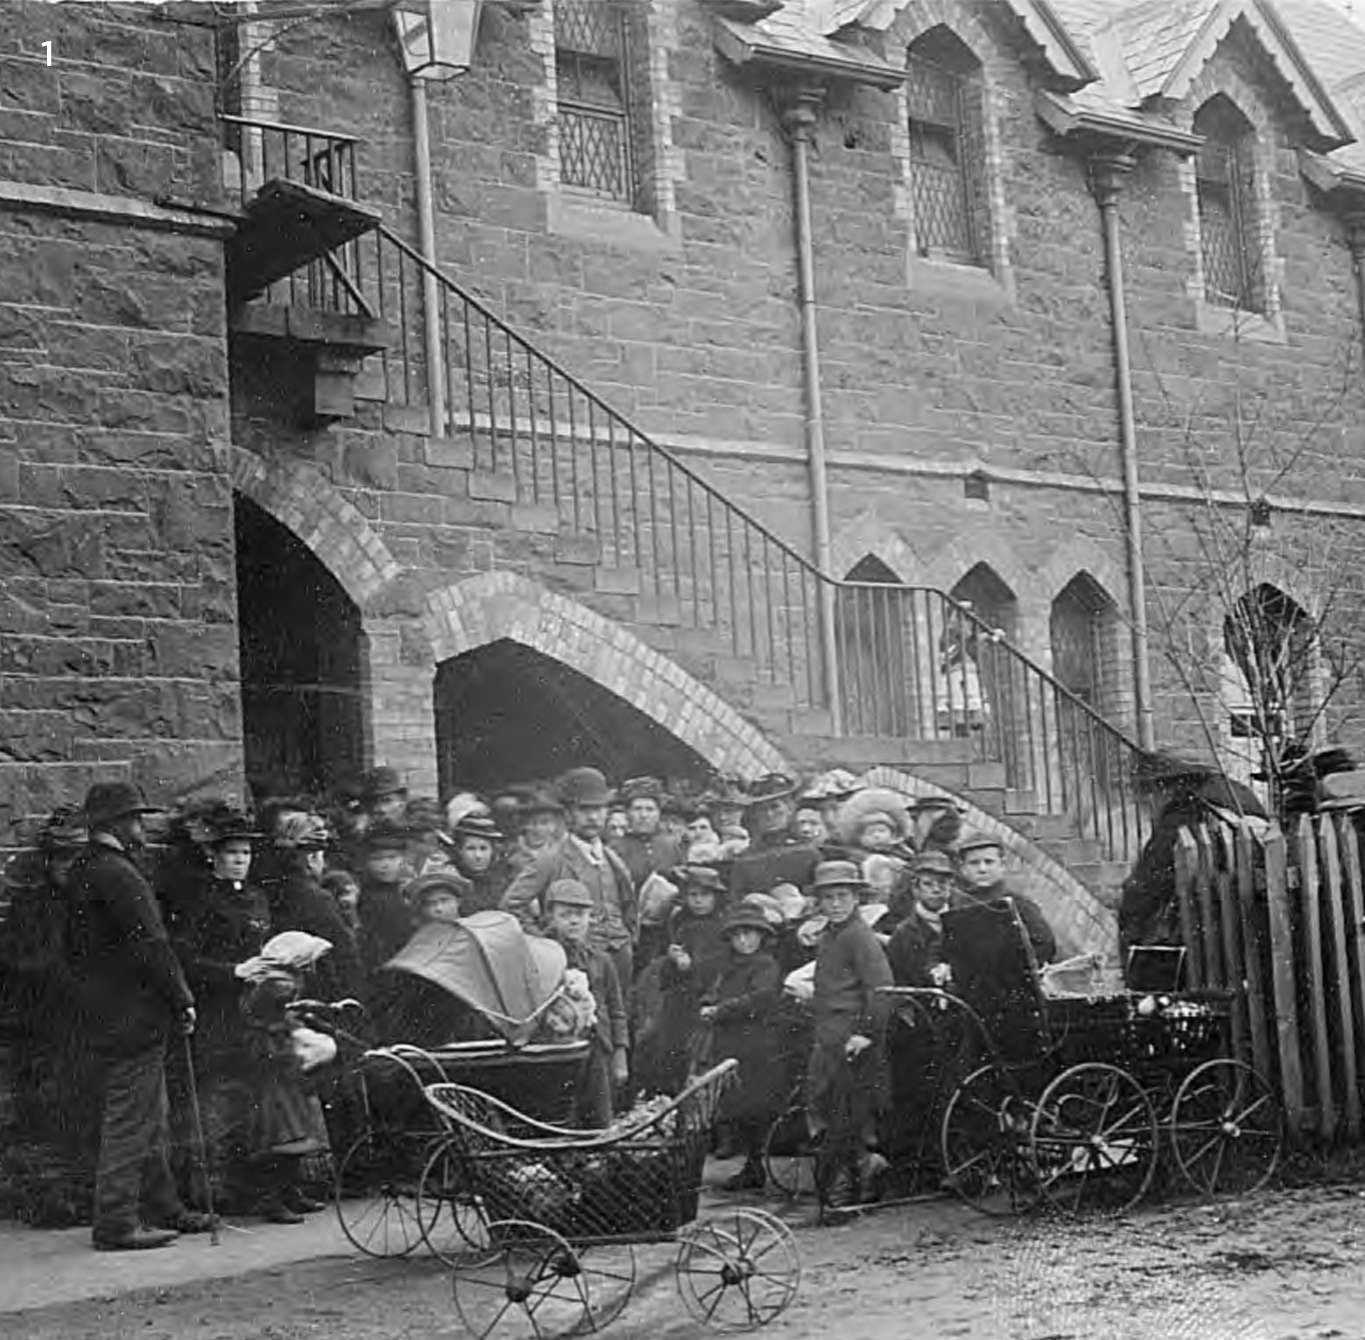 Local residents queuing for relief outside the School House, 1890s.